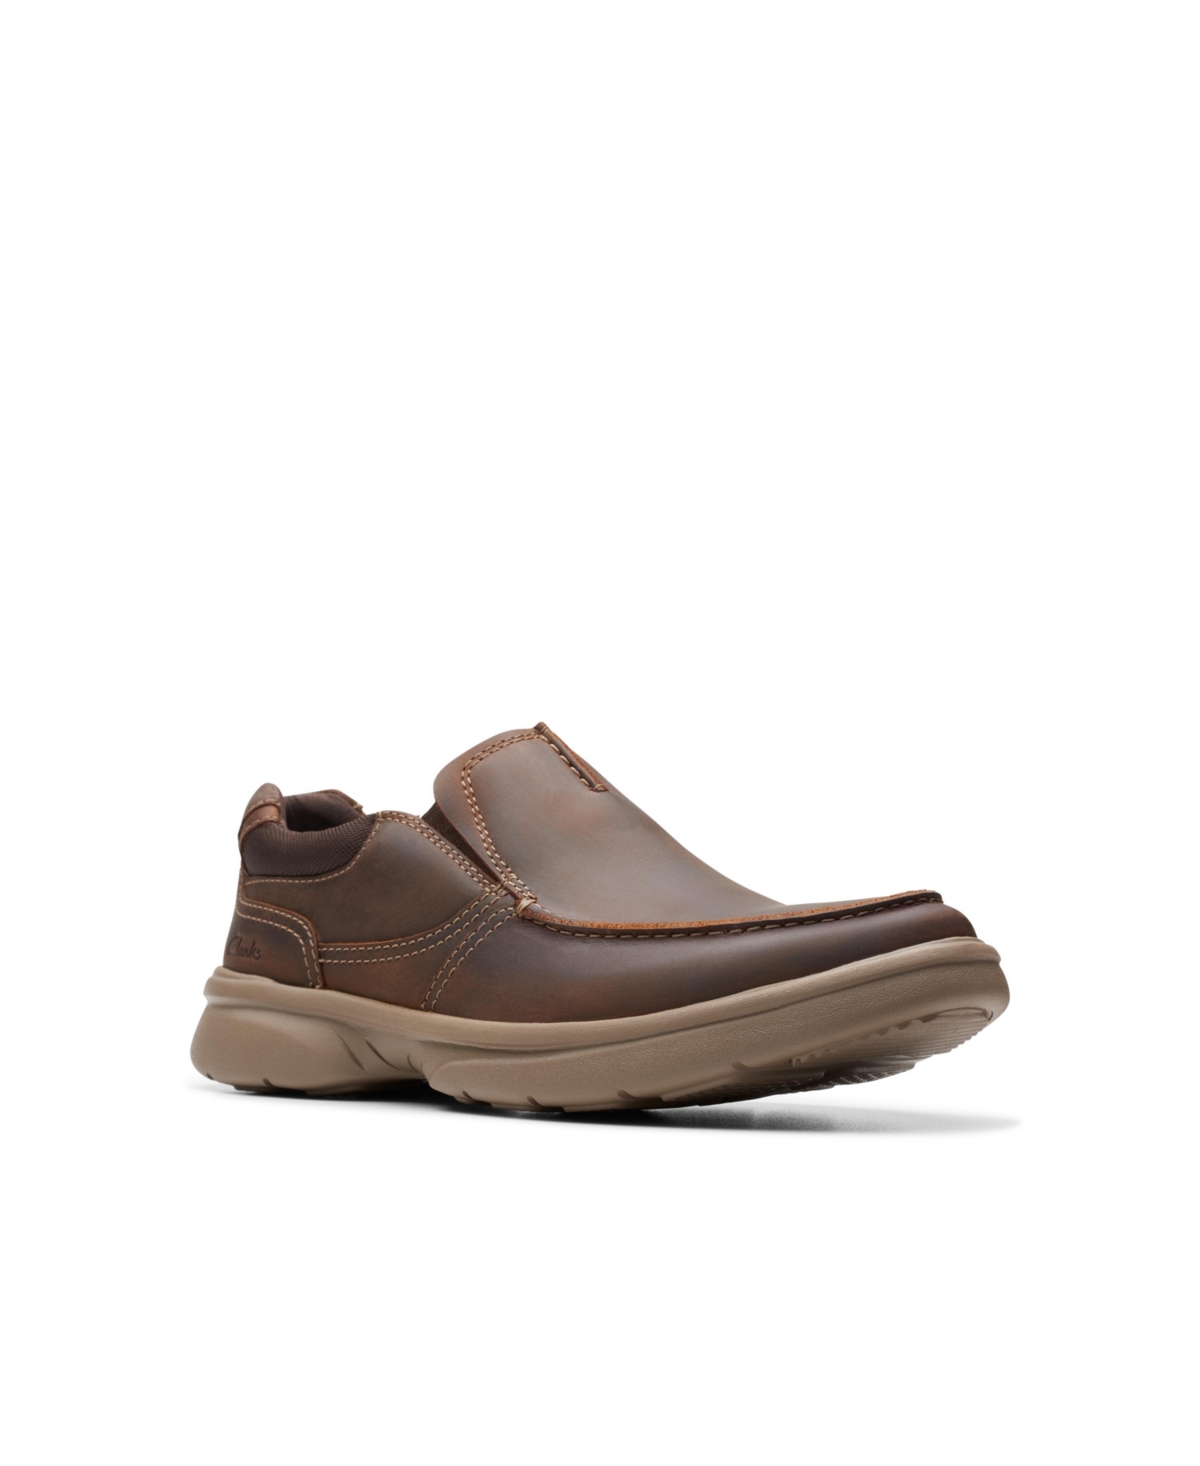 Clarks Men's Collection Bradley Free Slip On Shoes In Beeswax Leather